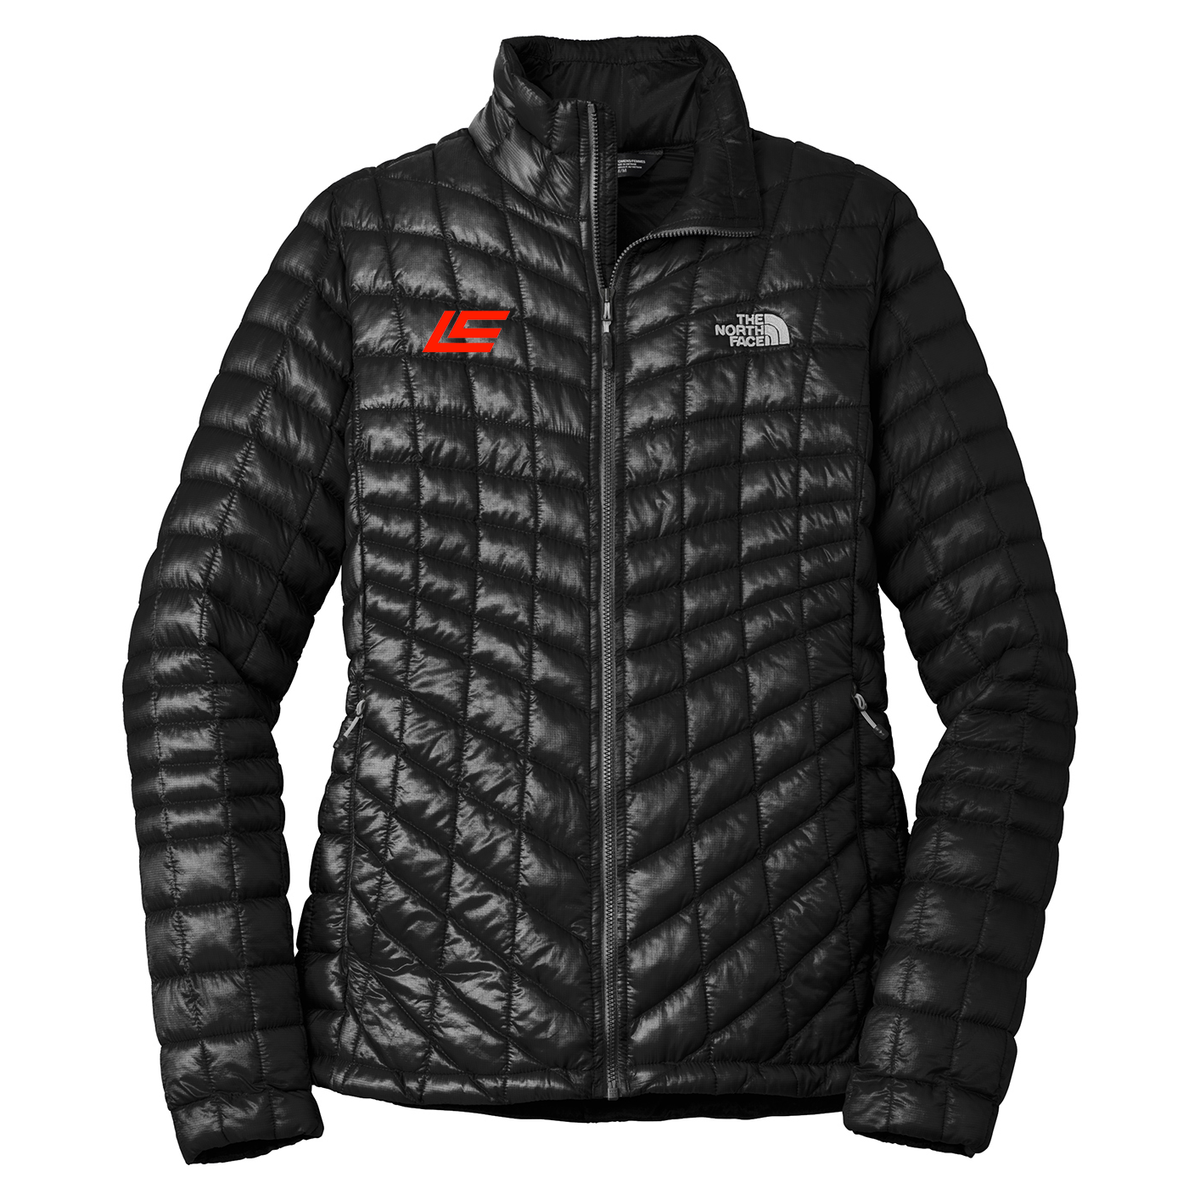 The North Face Ladies ThermoBall Jacket